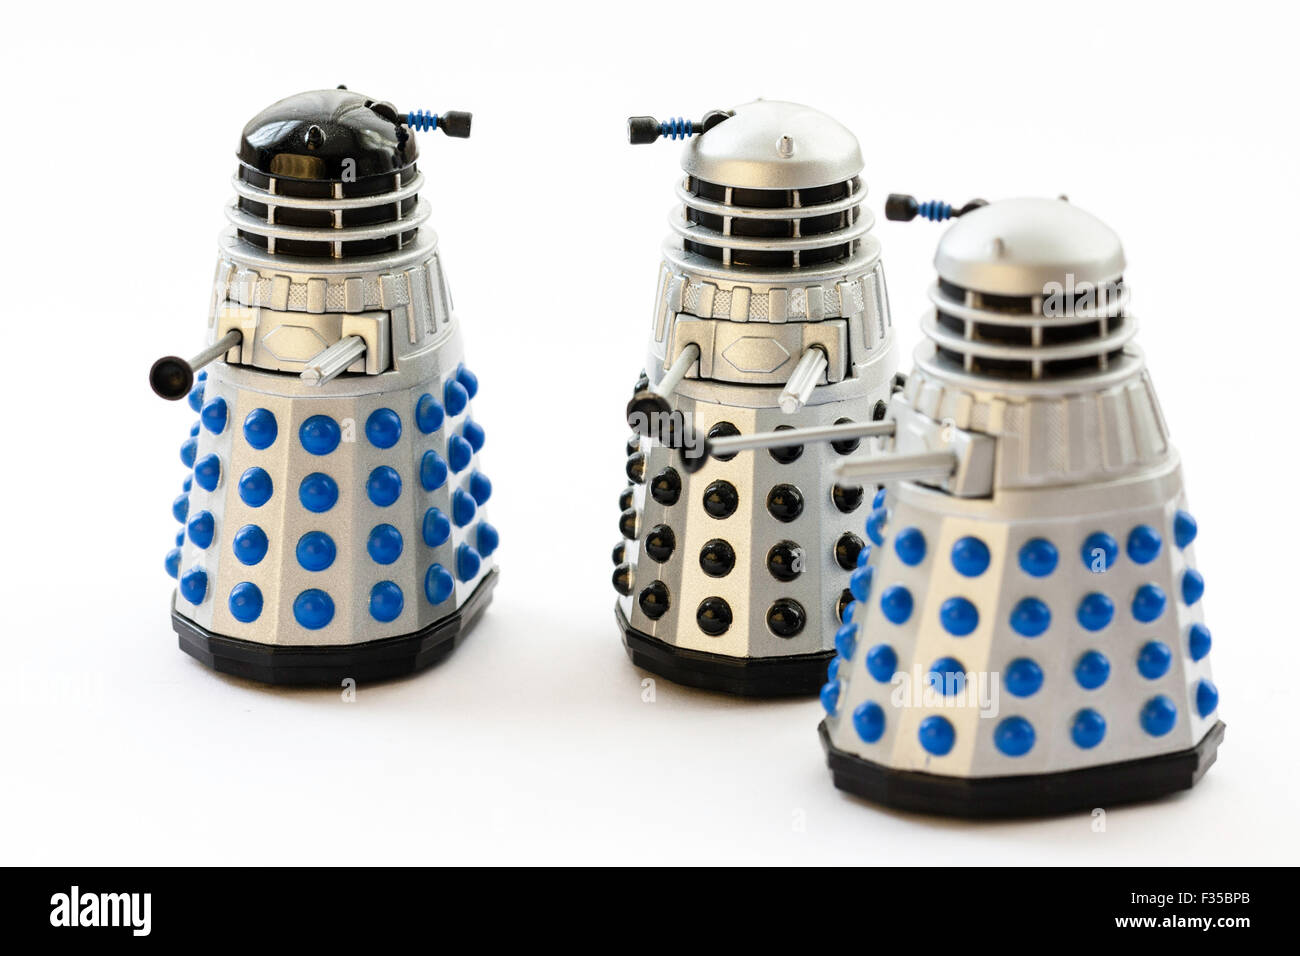 Daleks from the BBC Dr Who TV series. Famous metal monster. Corgi toy, metal Dalek with turning head. Three various types on plain white background. Stock Photo